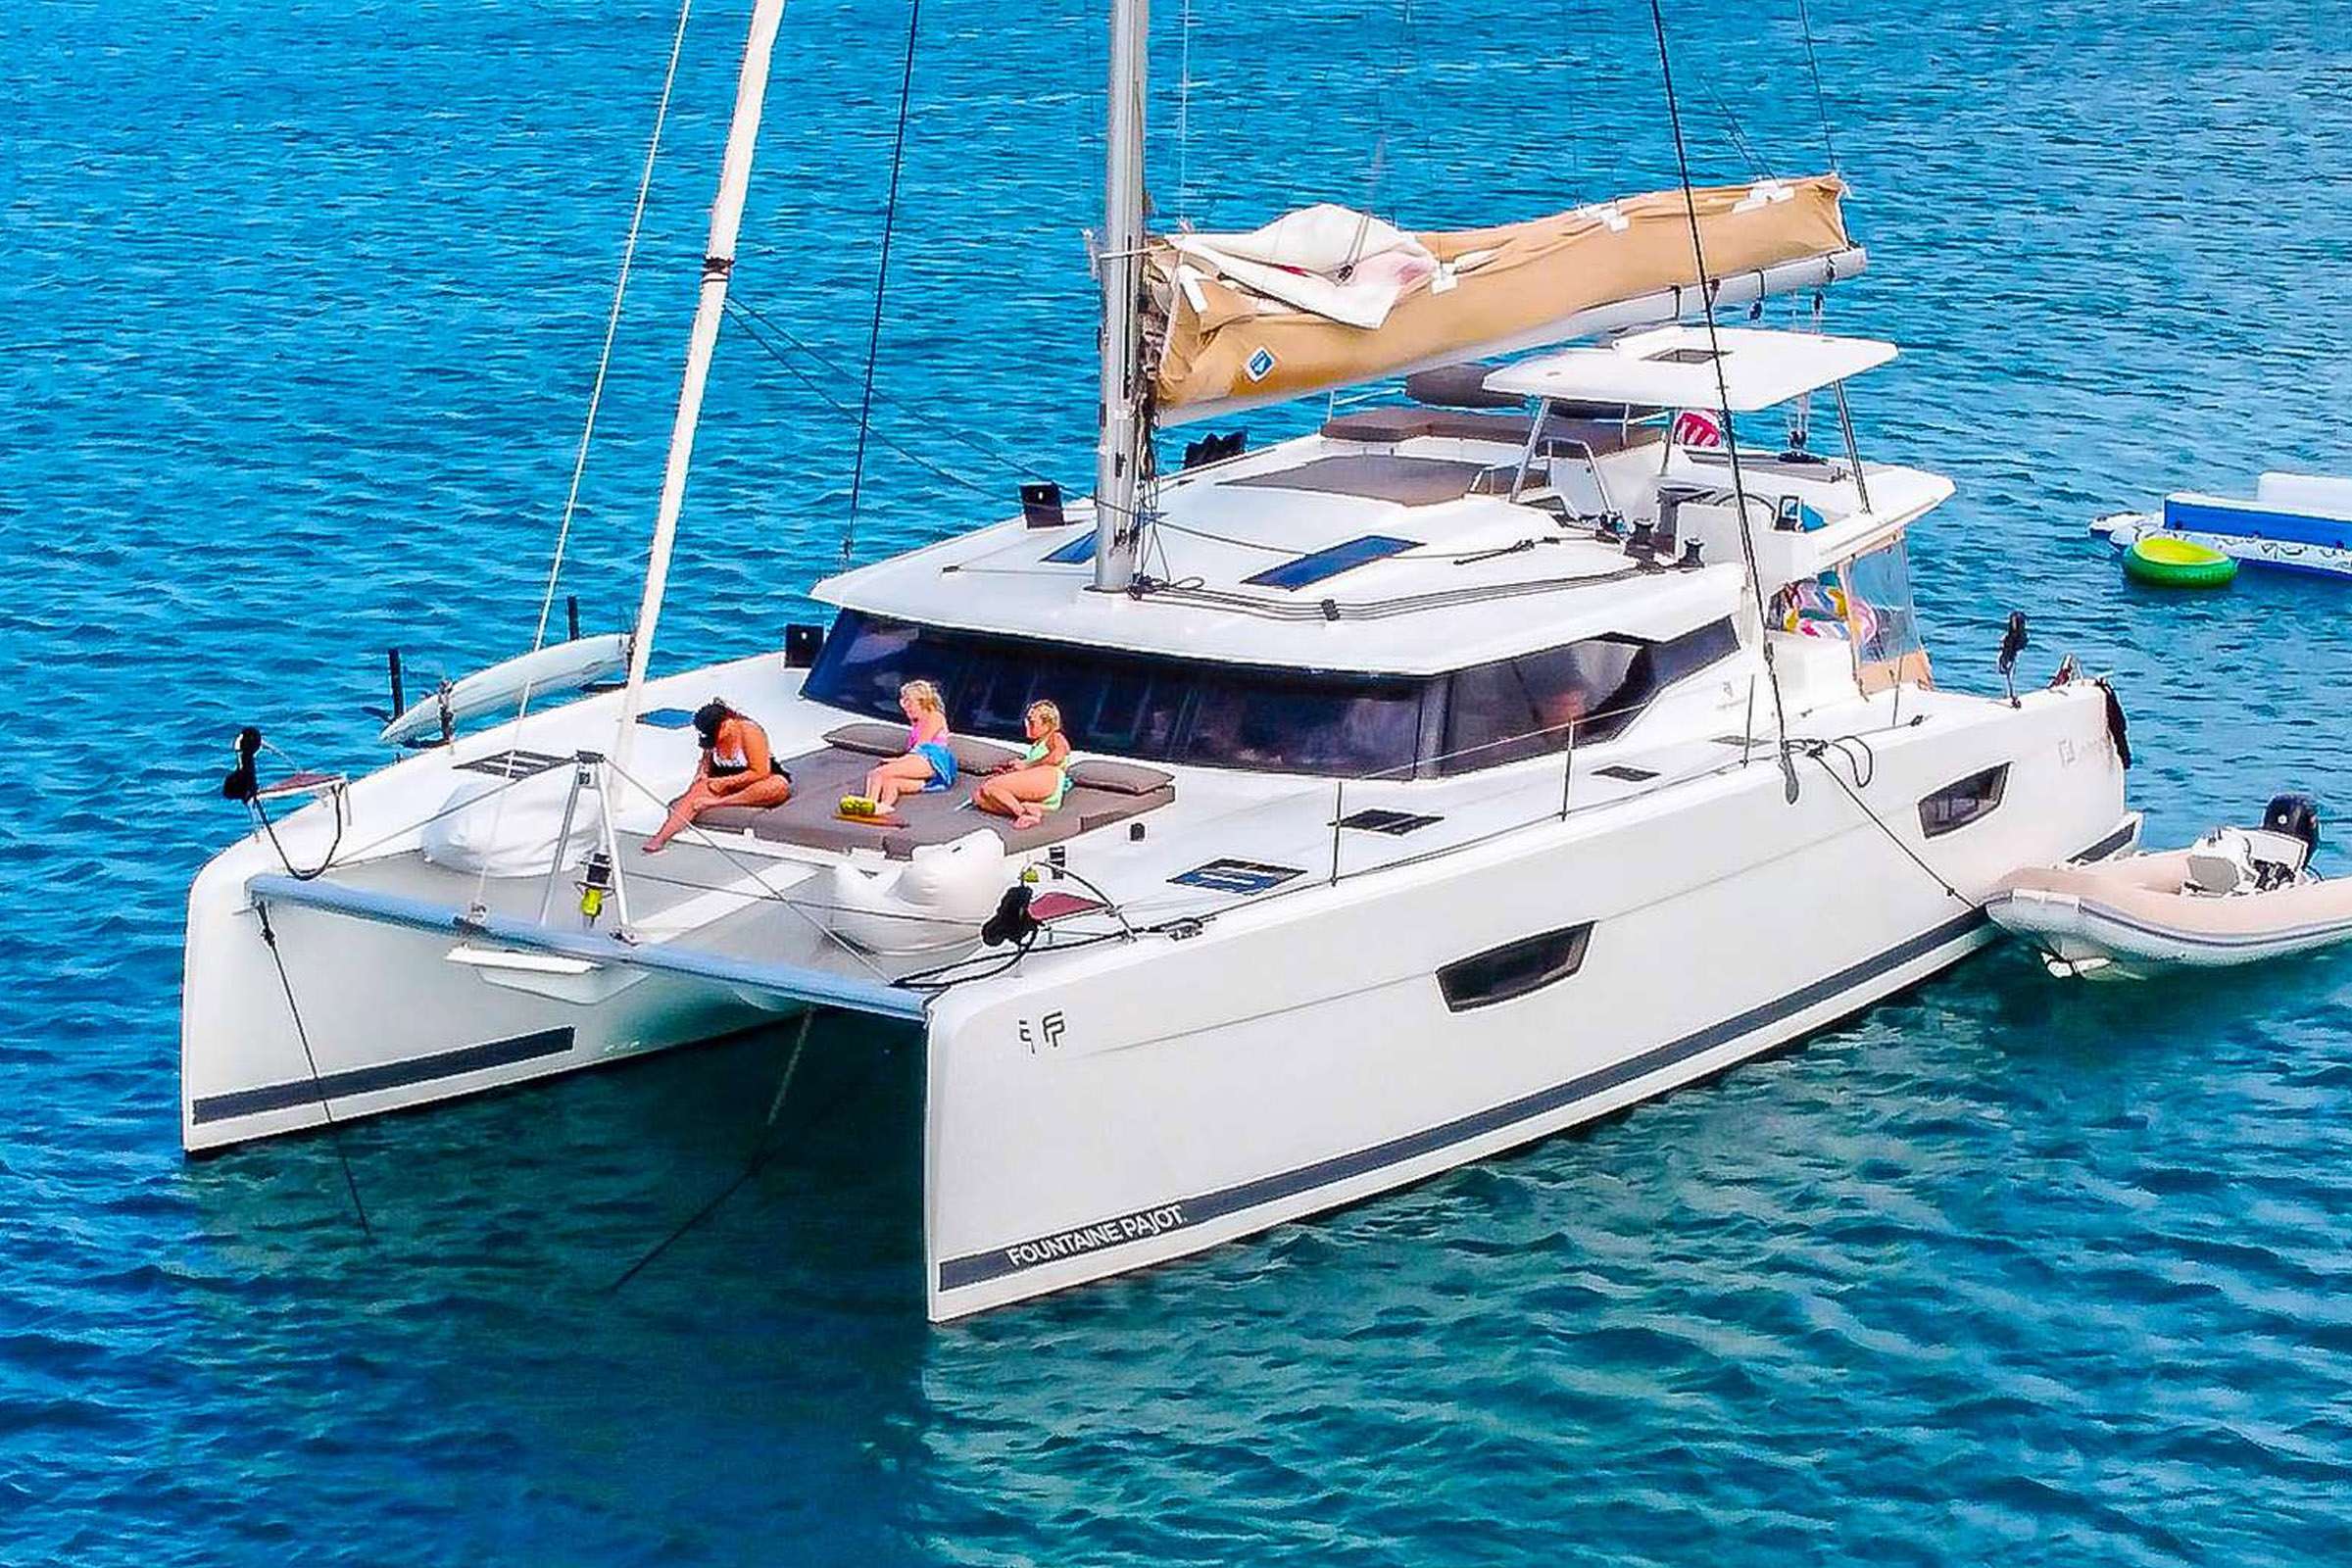 BLACK TORTUGA Yacht Charter - Ritzy Charters